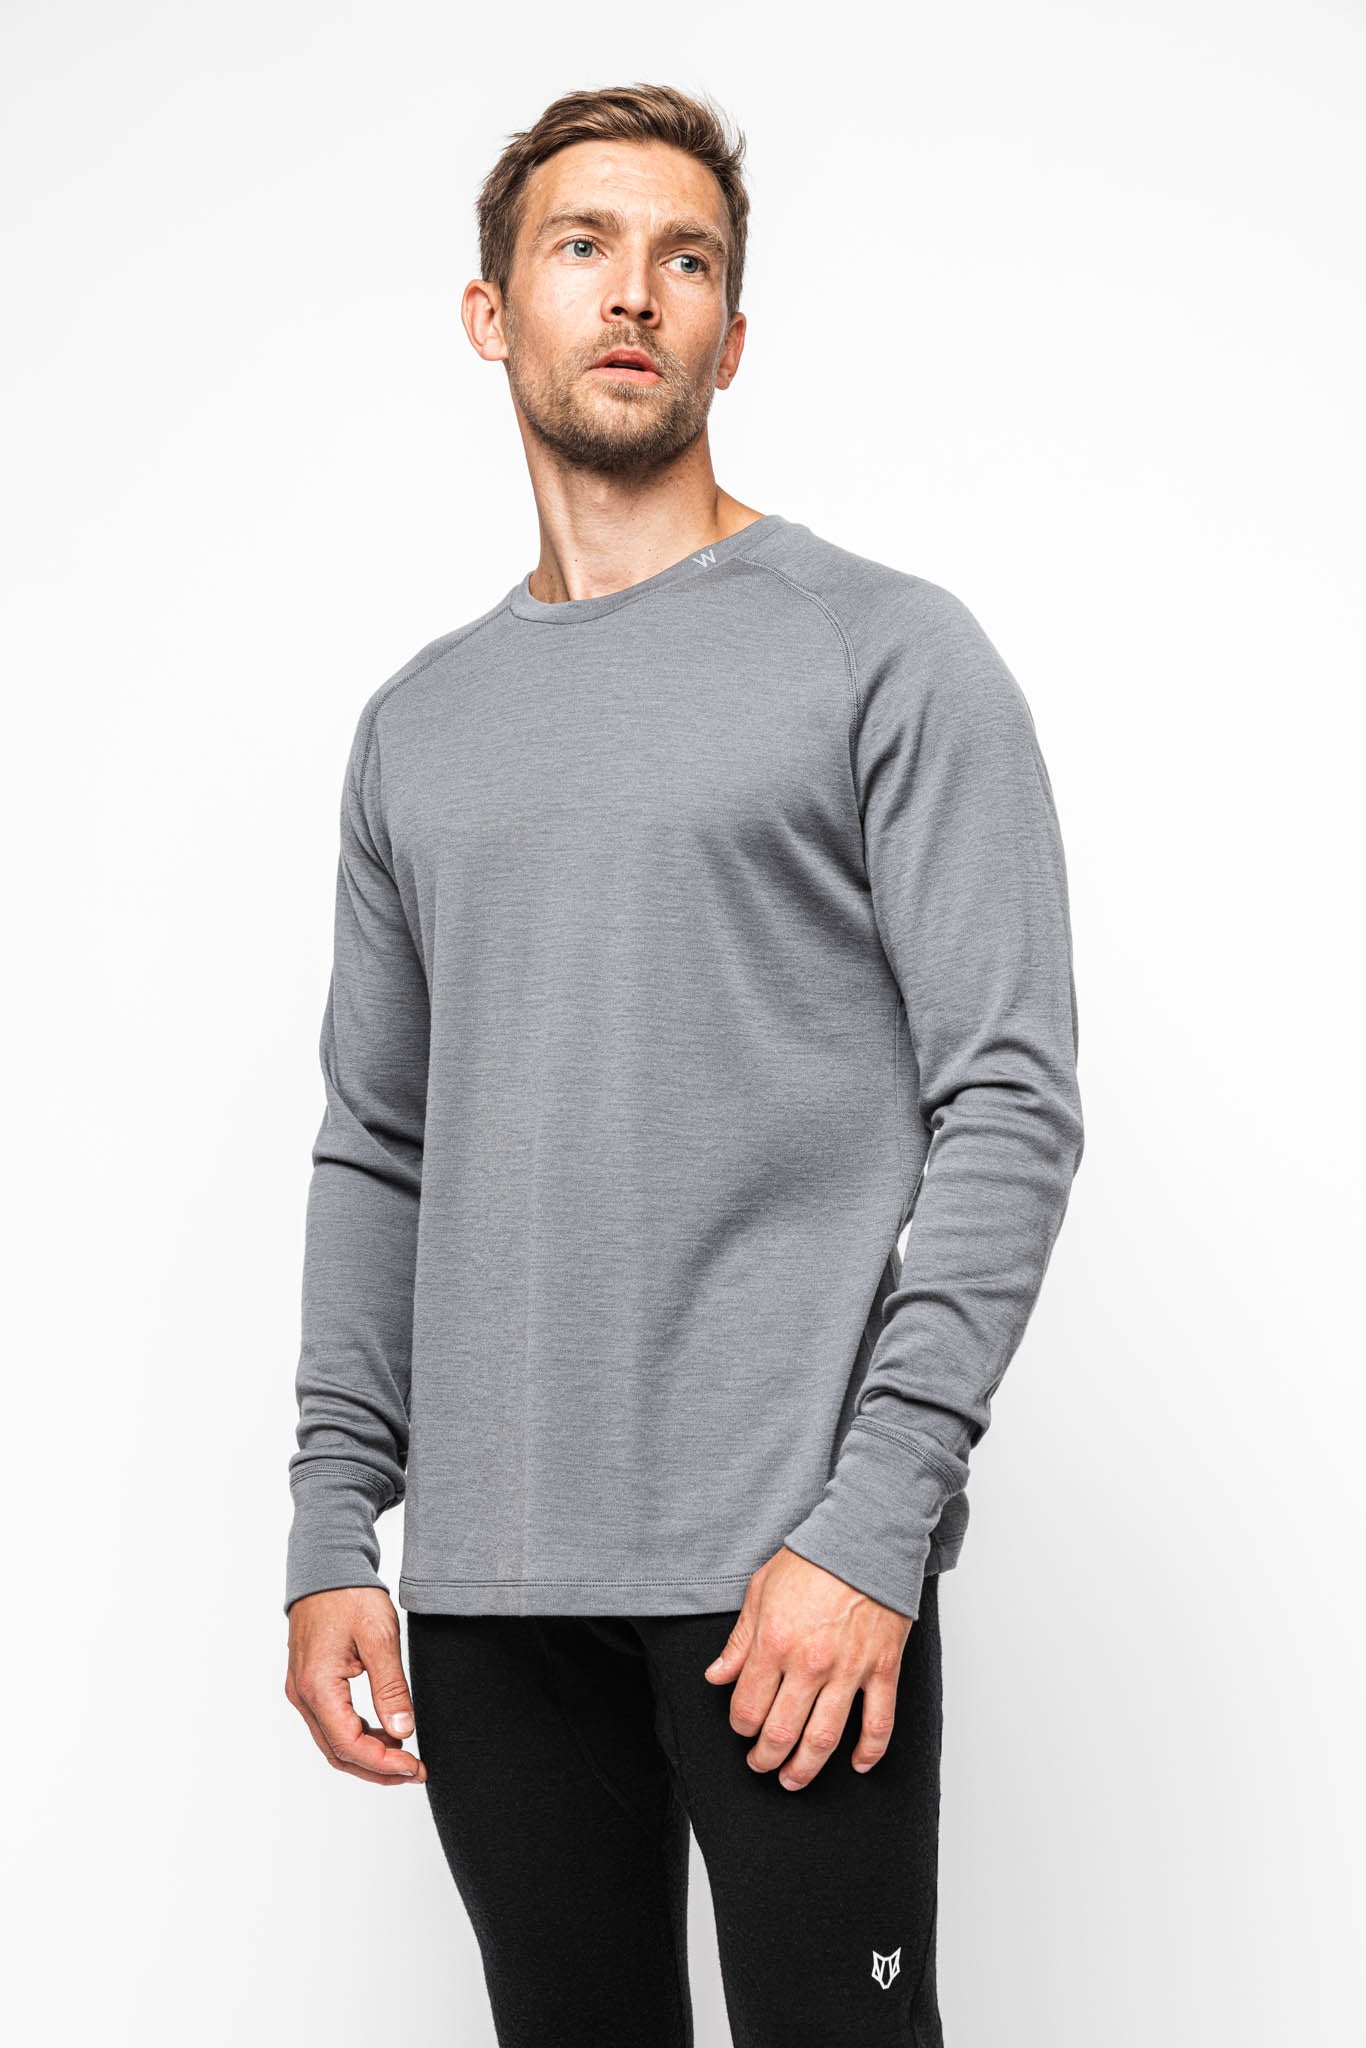 Woolove 100% Merino Wool Base Layer - Men's Long Sleeve Crew Neck Shirt  190g - Midweight, Odour Resistant, Moisture-Wicking (Small, Grey) :  : Clothing, Shoes & Accessories